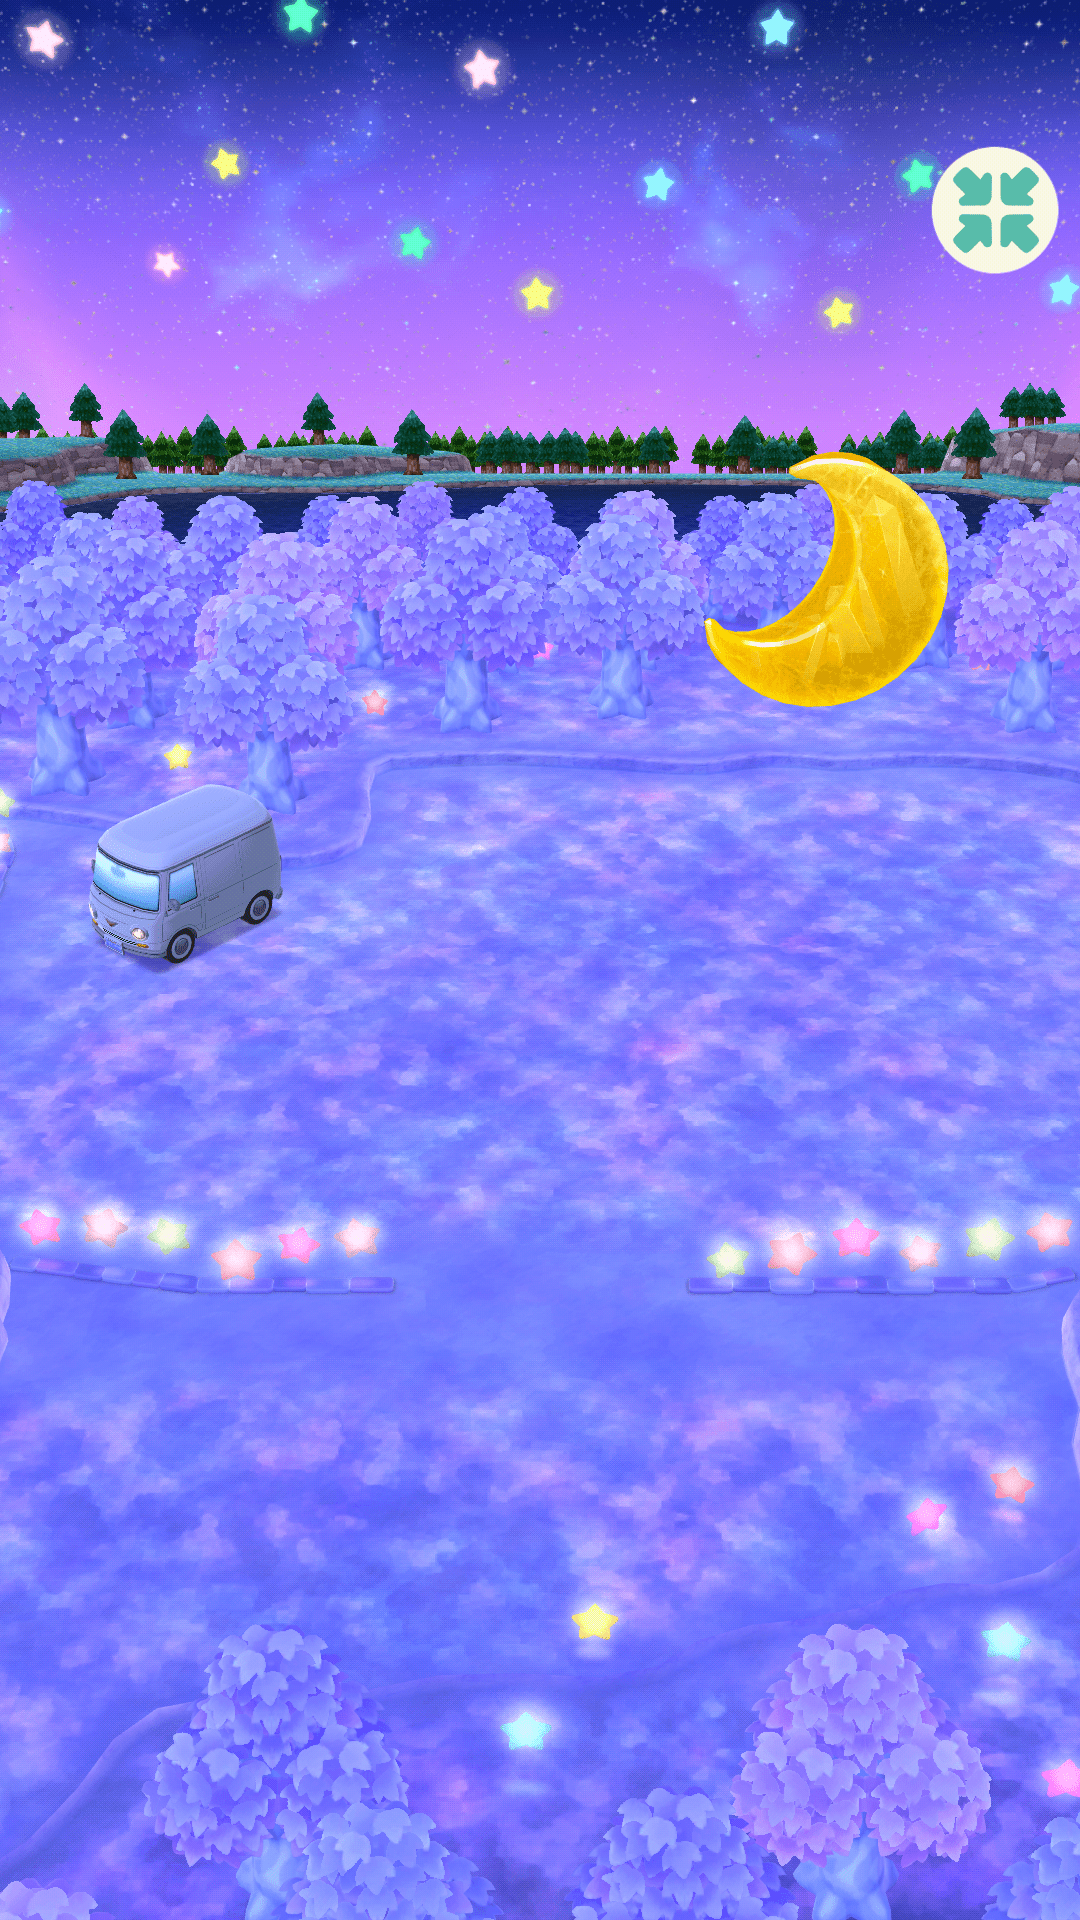 enchanted forest (Camping site backdrop). Animal Crossing: Pocket Camp Info